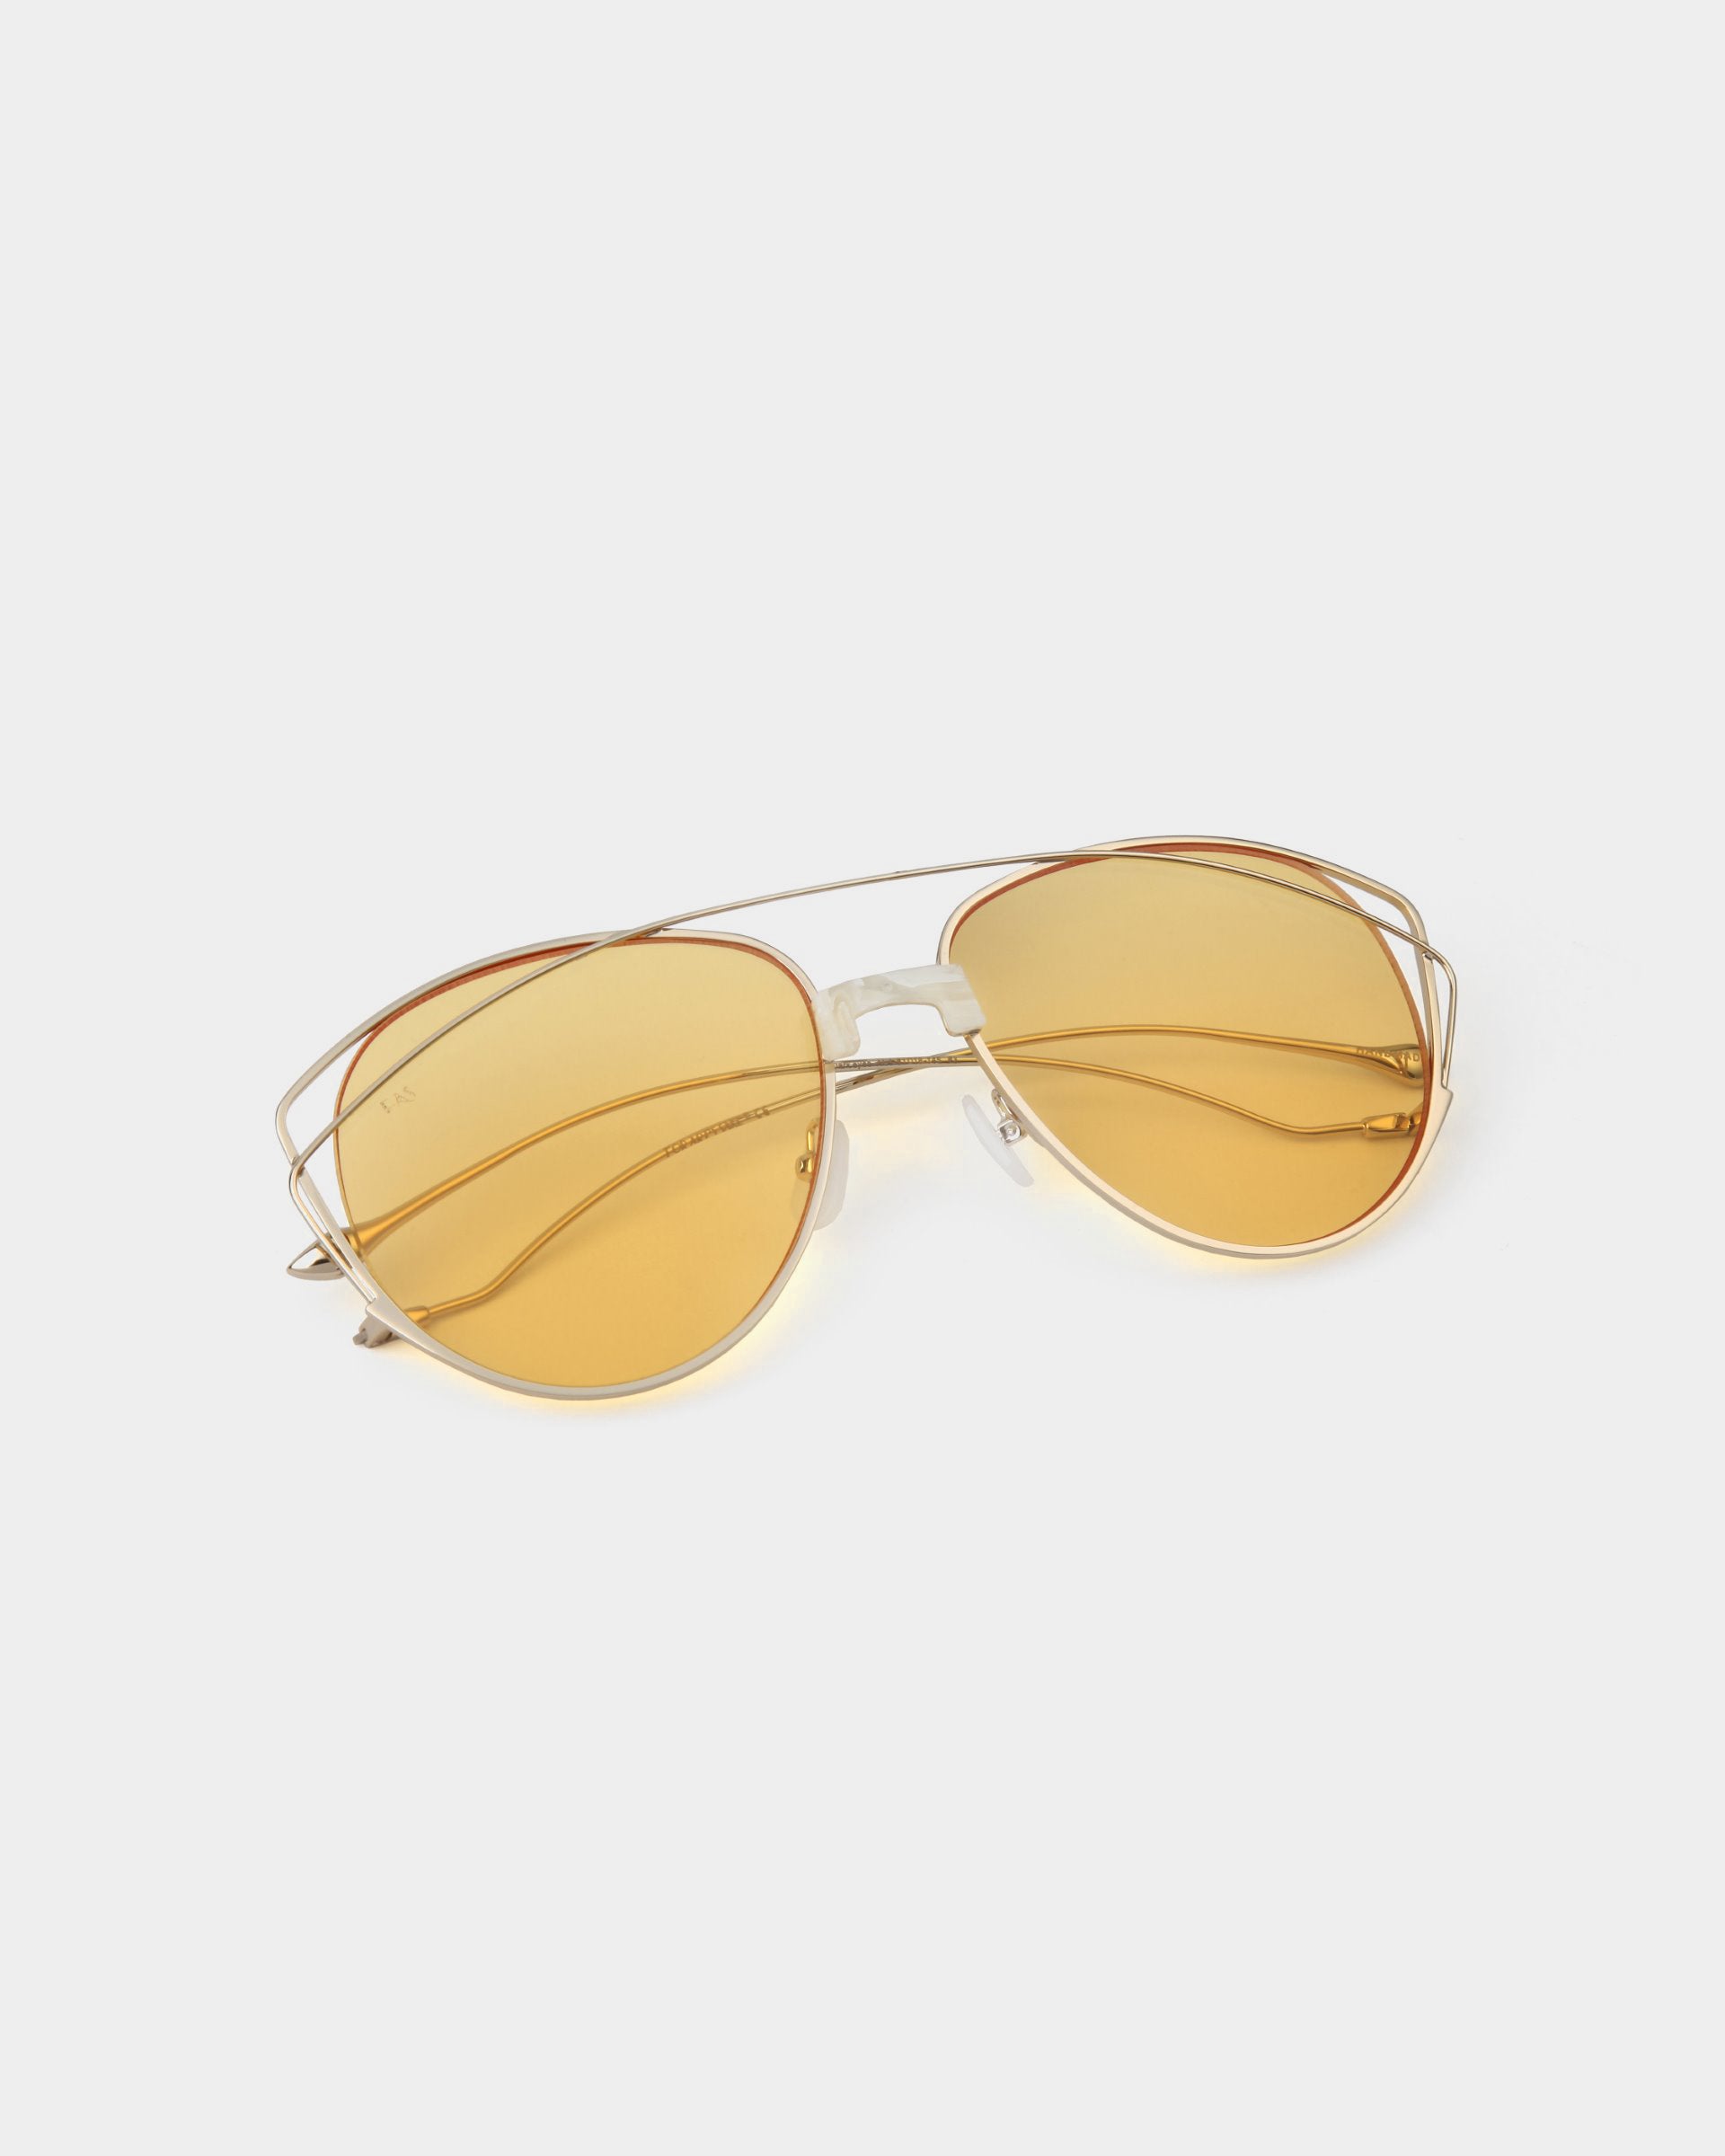 A pair of aviator-style Dark Eyes sunglasses with golden-tinted, nylon lenses and thin, stainless steel gold frames placed on a white background. The glasses offer 100% UV protection and have a double bridge design, adding a stylish flair to their classic look by For Art&#39;s Sake®.